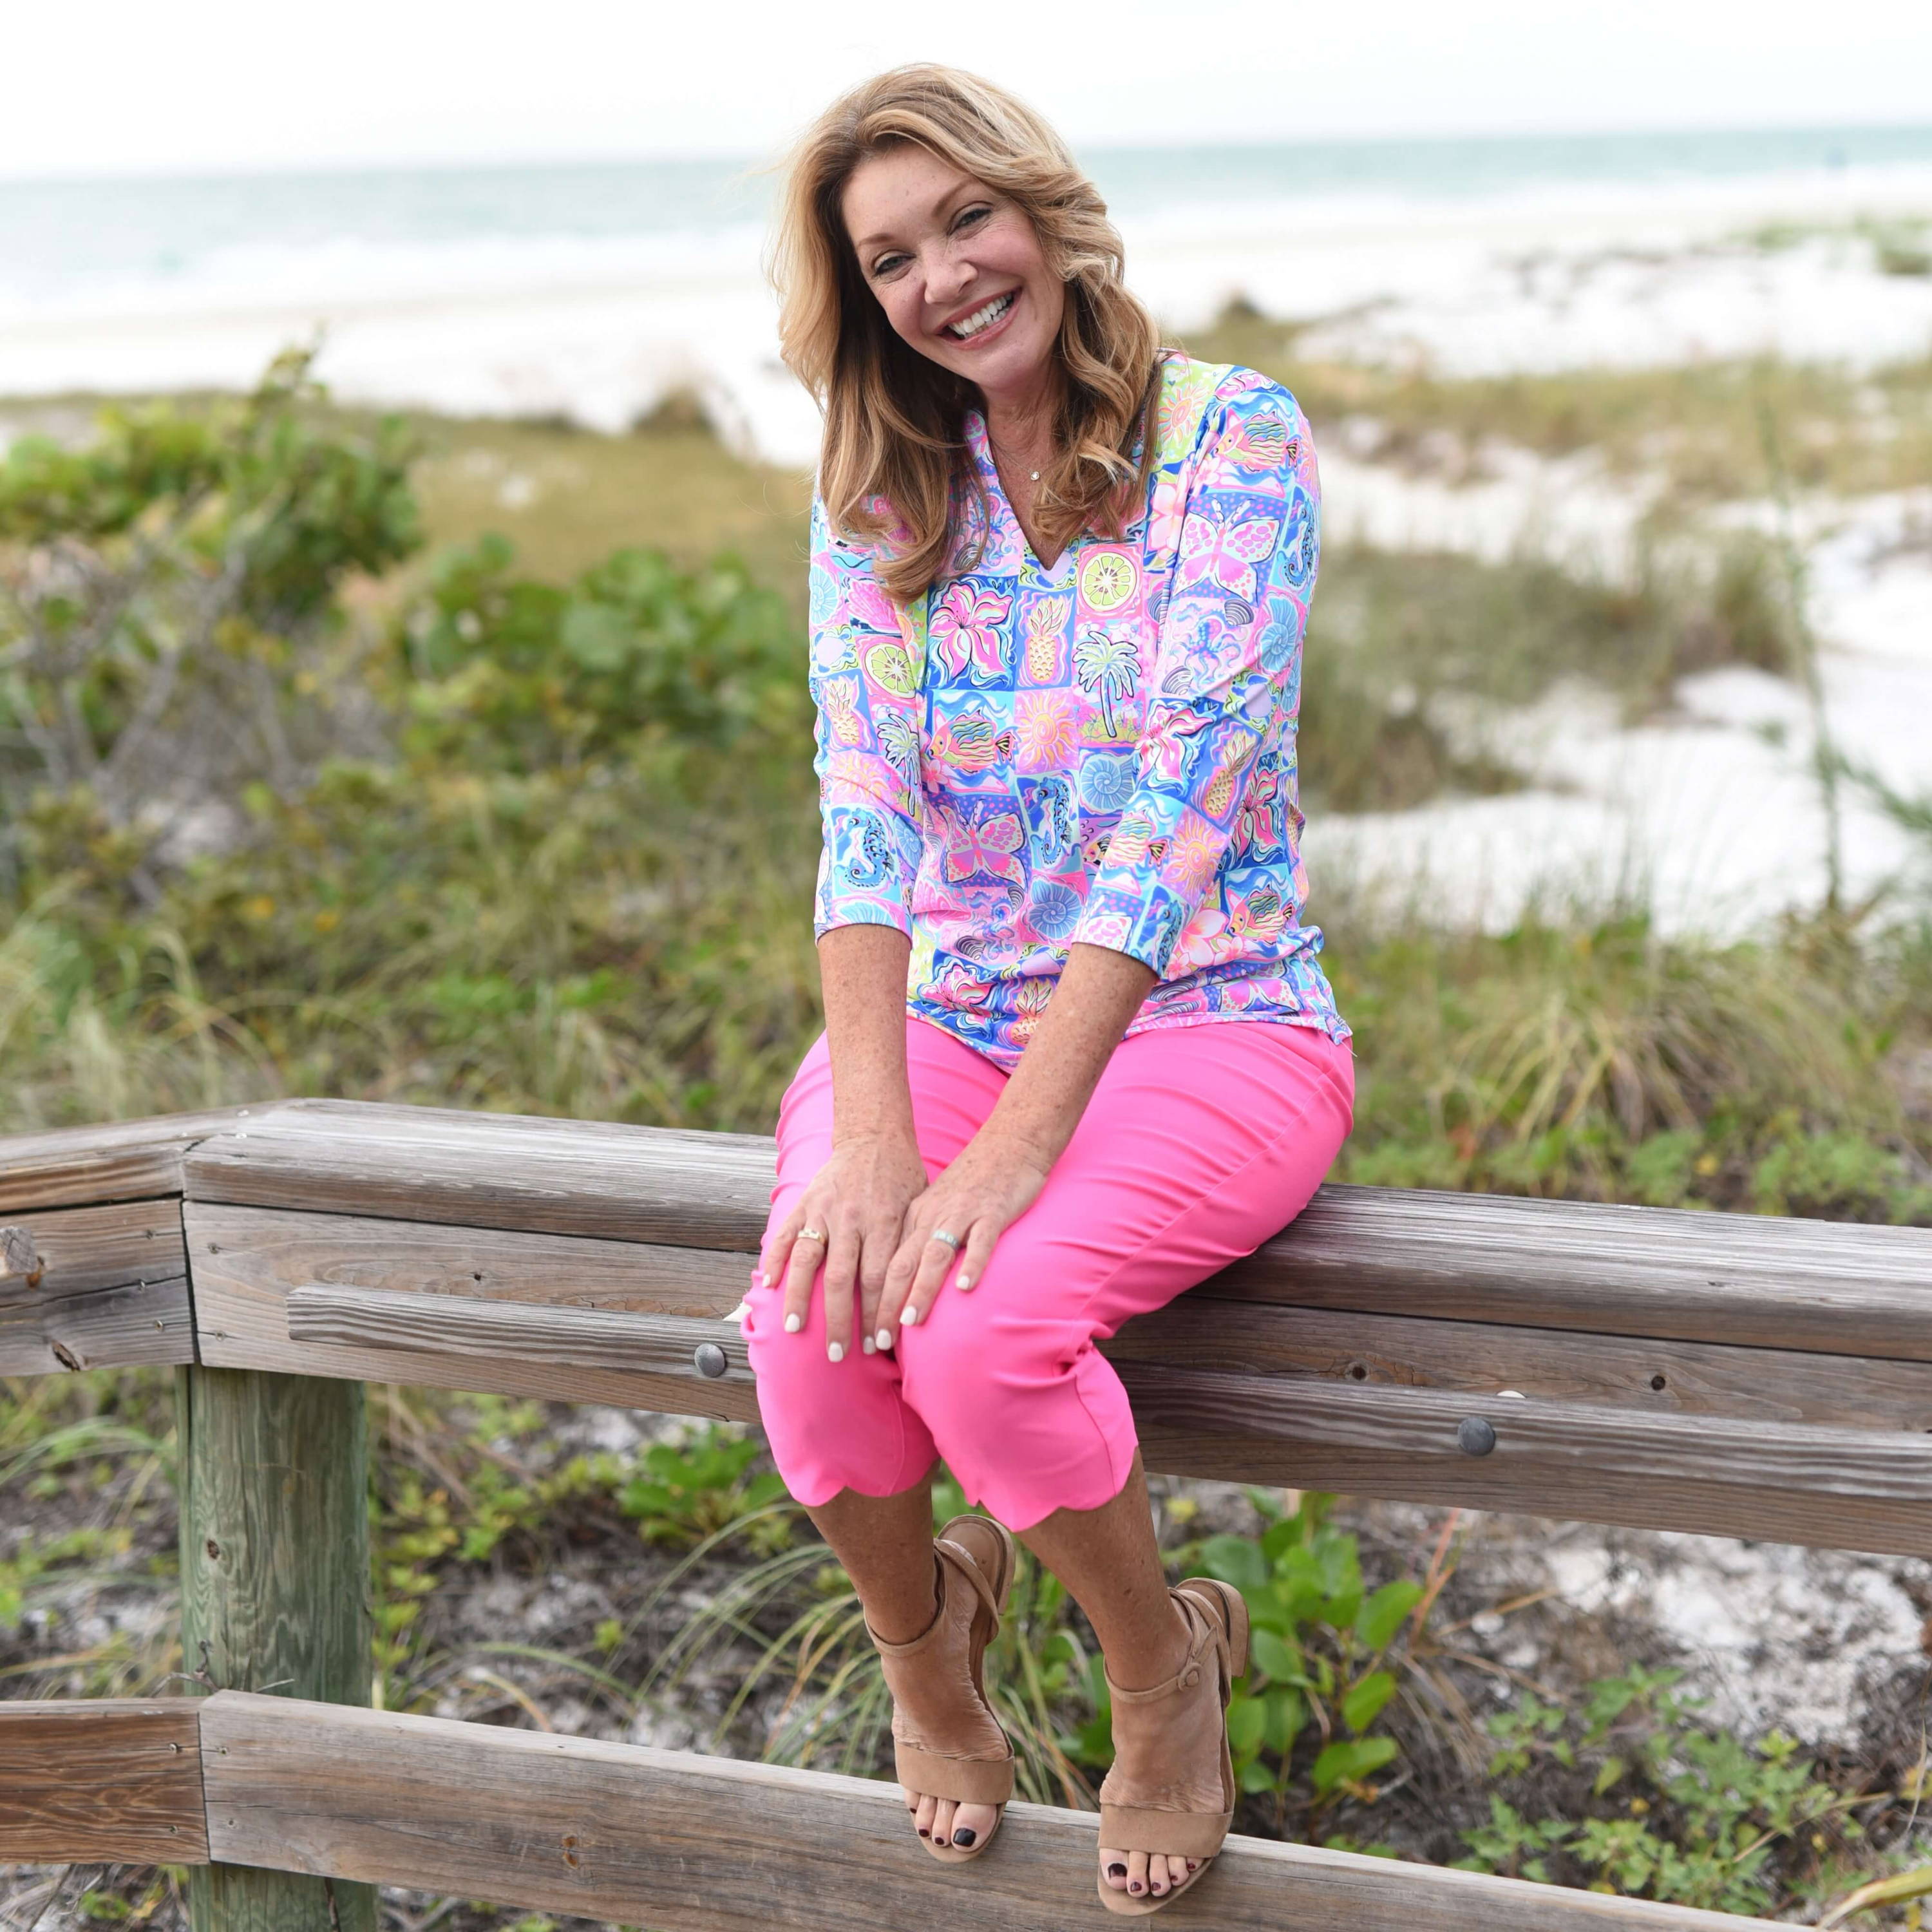 A smiling blonde woman wearing a printed top and pink capri pants sits on the ledge of a wooden boardwalk at the beach